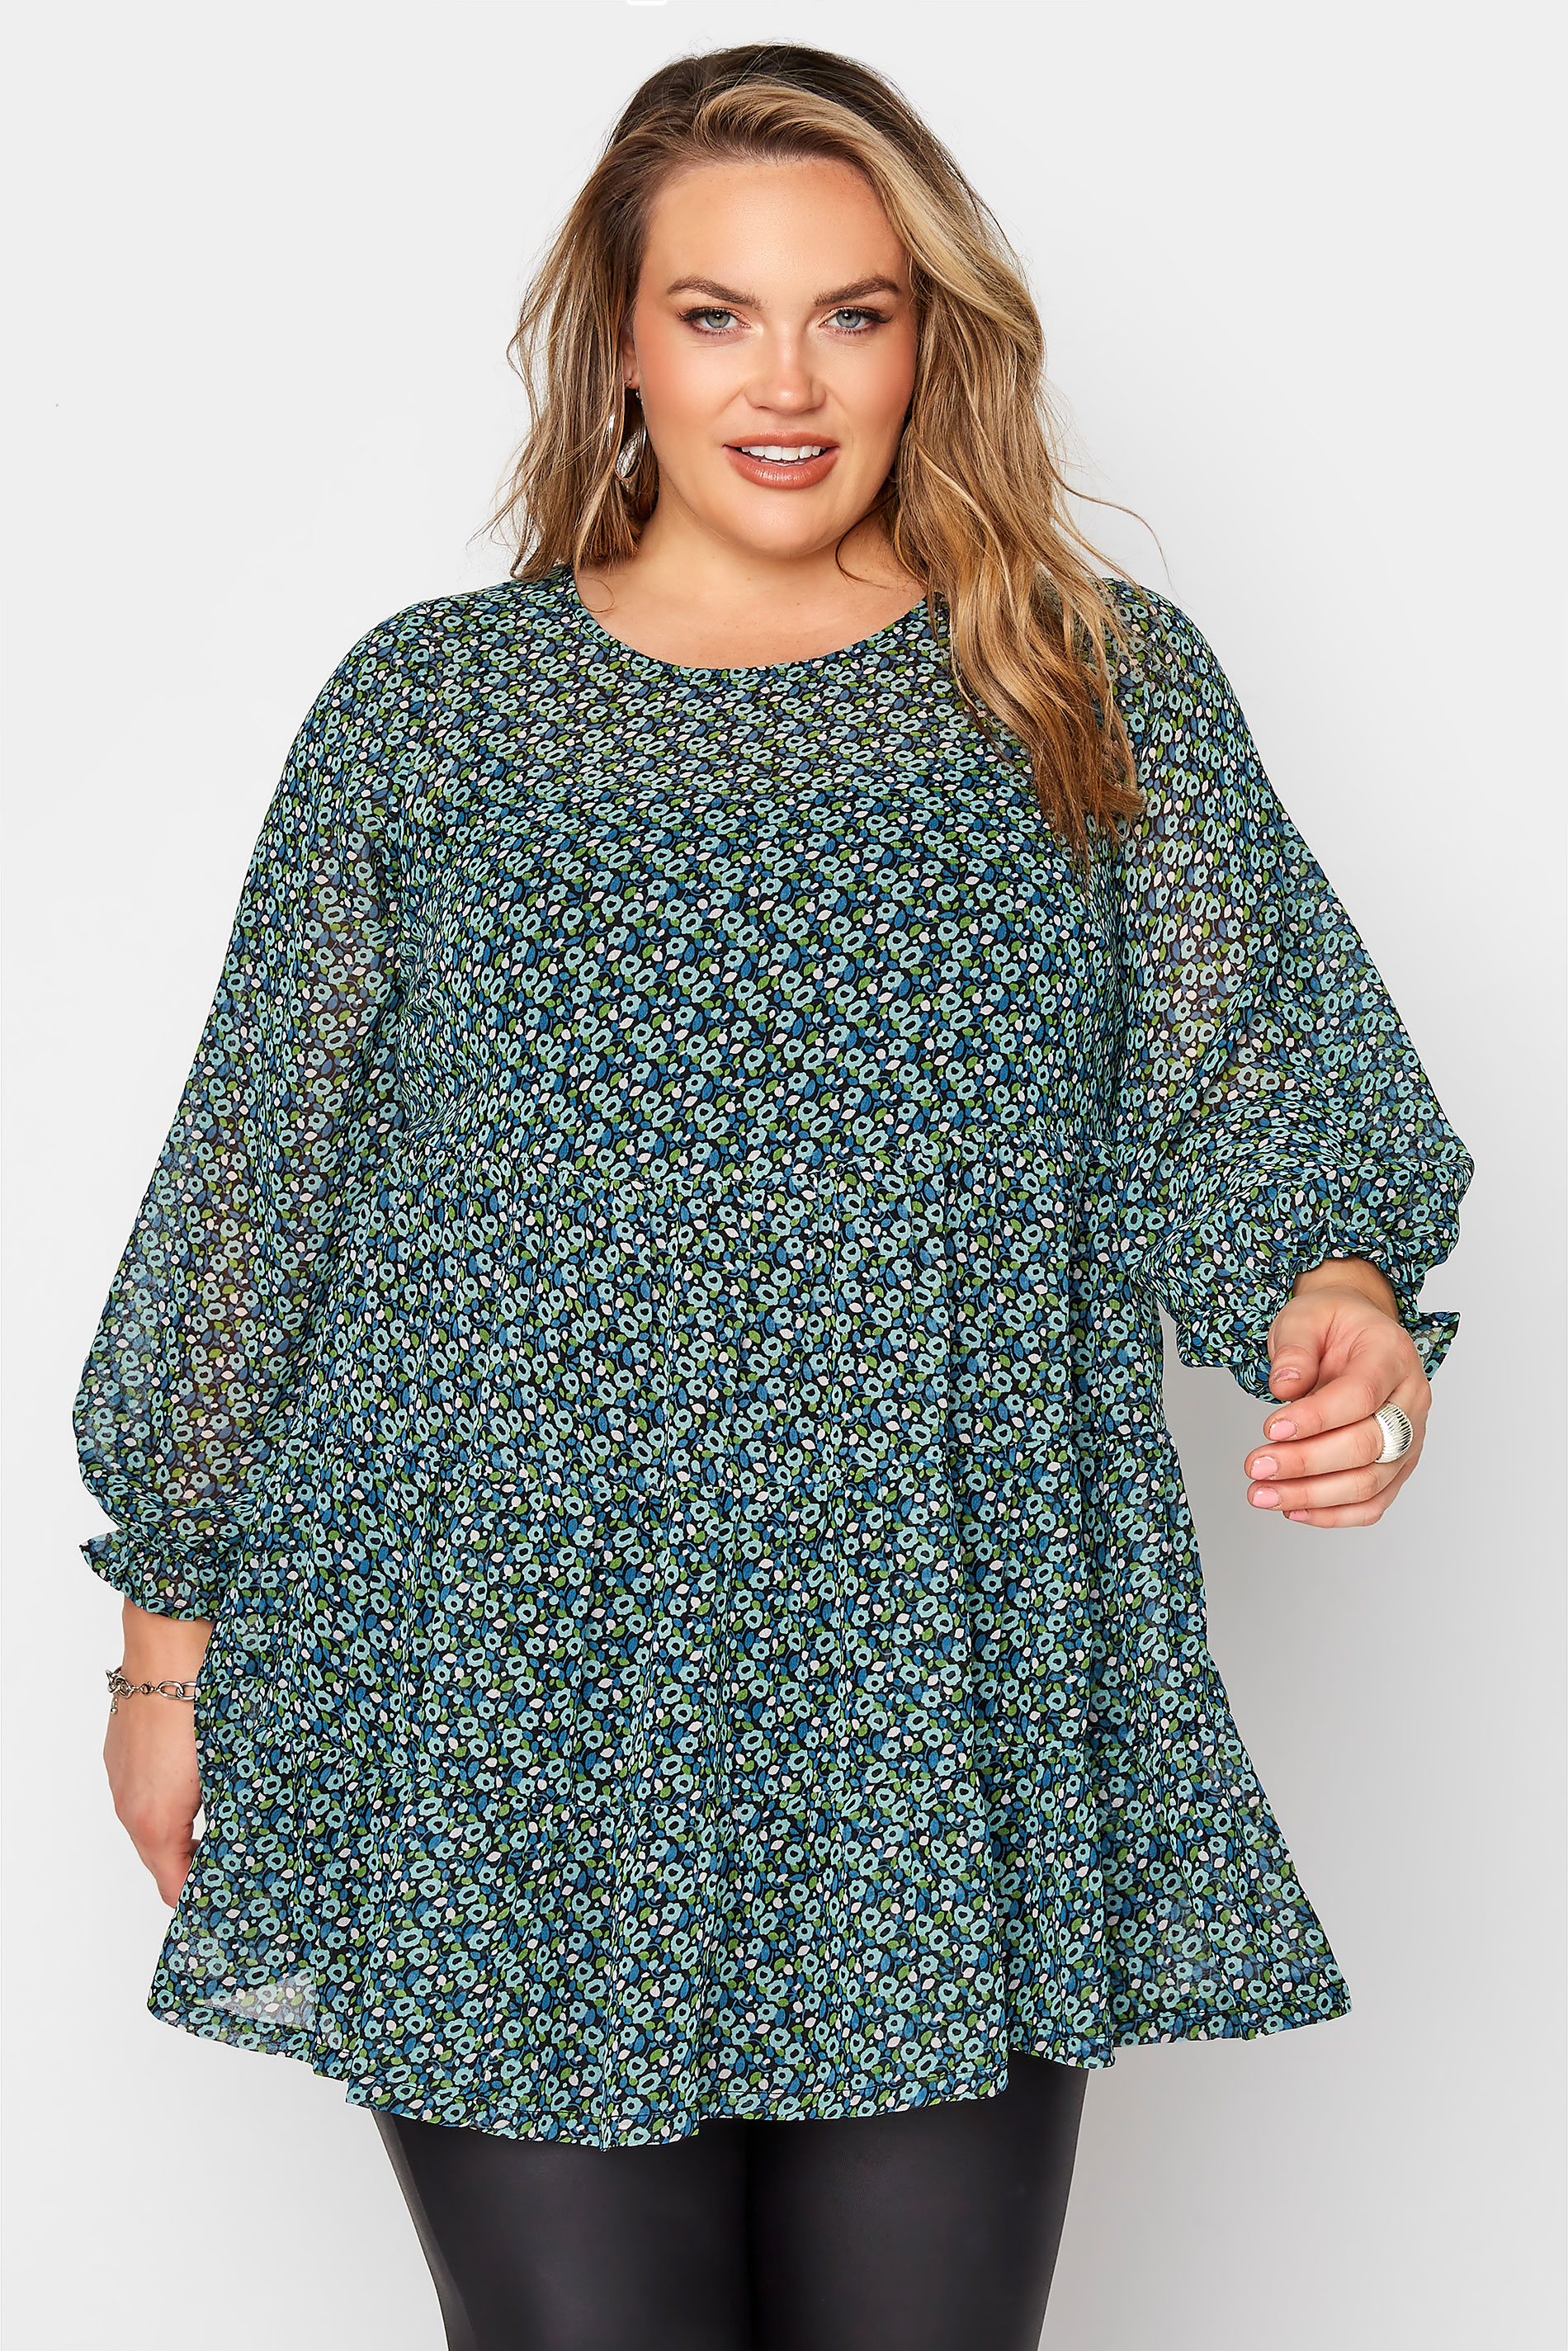 LIMITED COLLECTION Curve Green Ditsy Smock Tunic Top_E.jpg